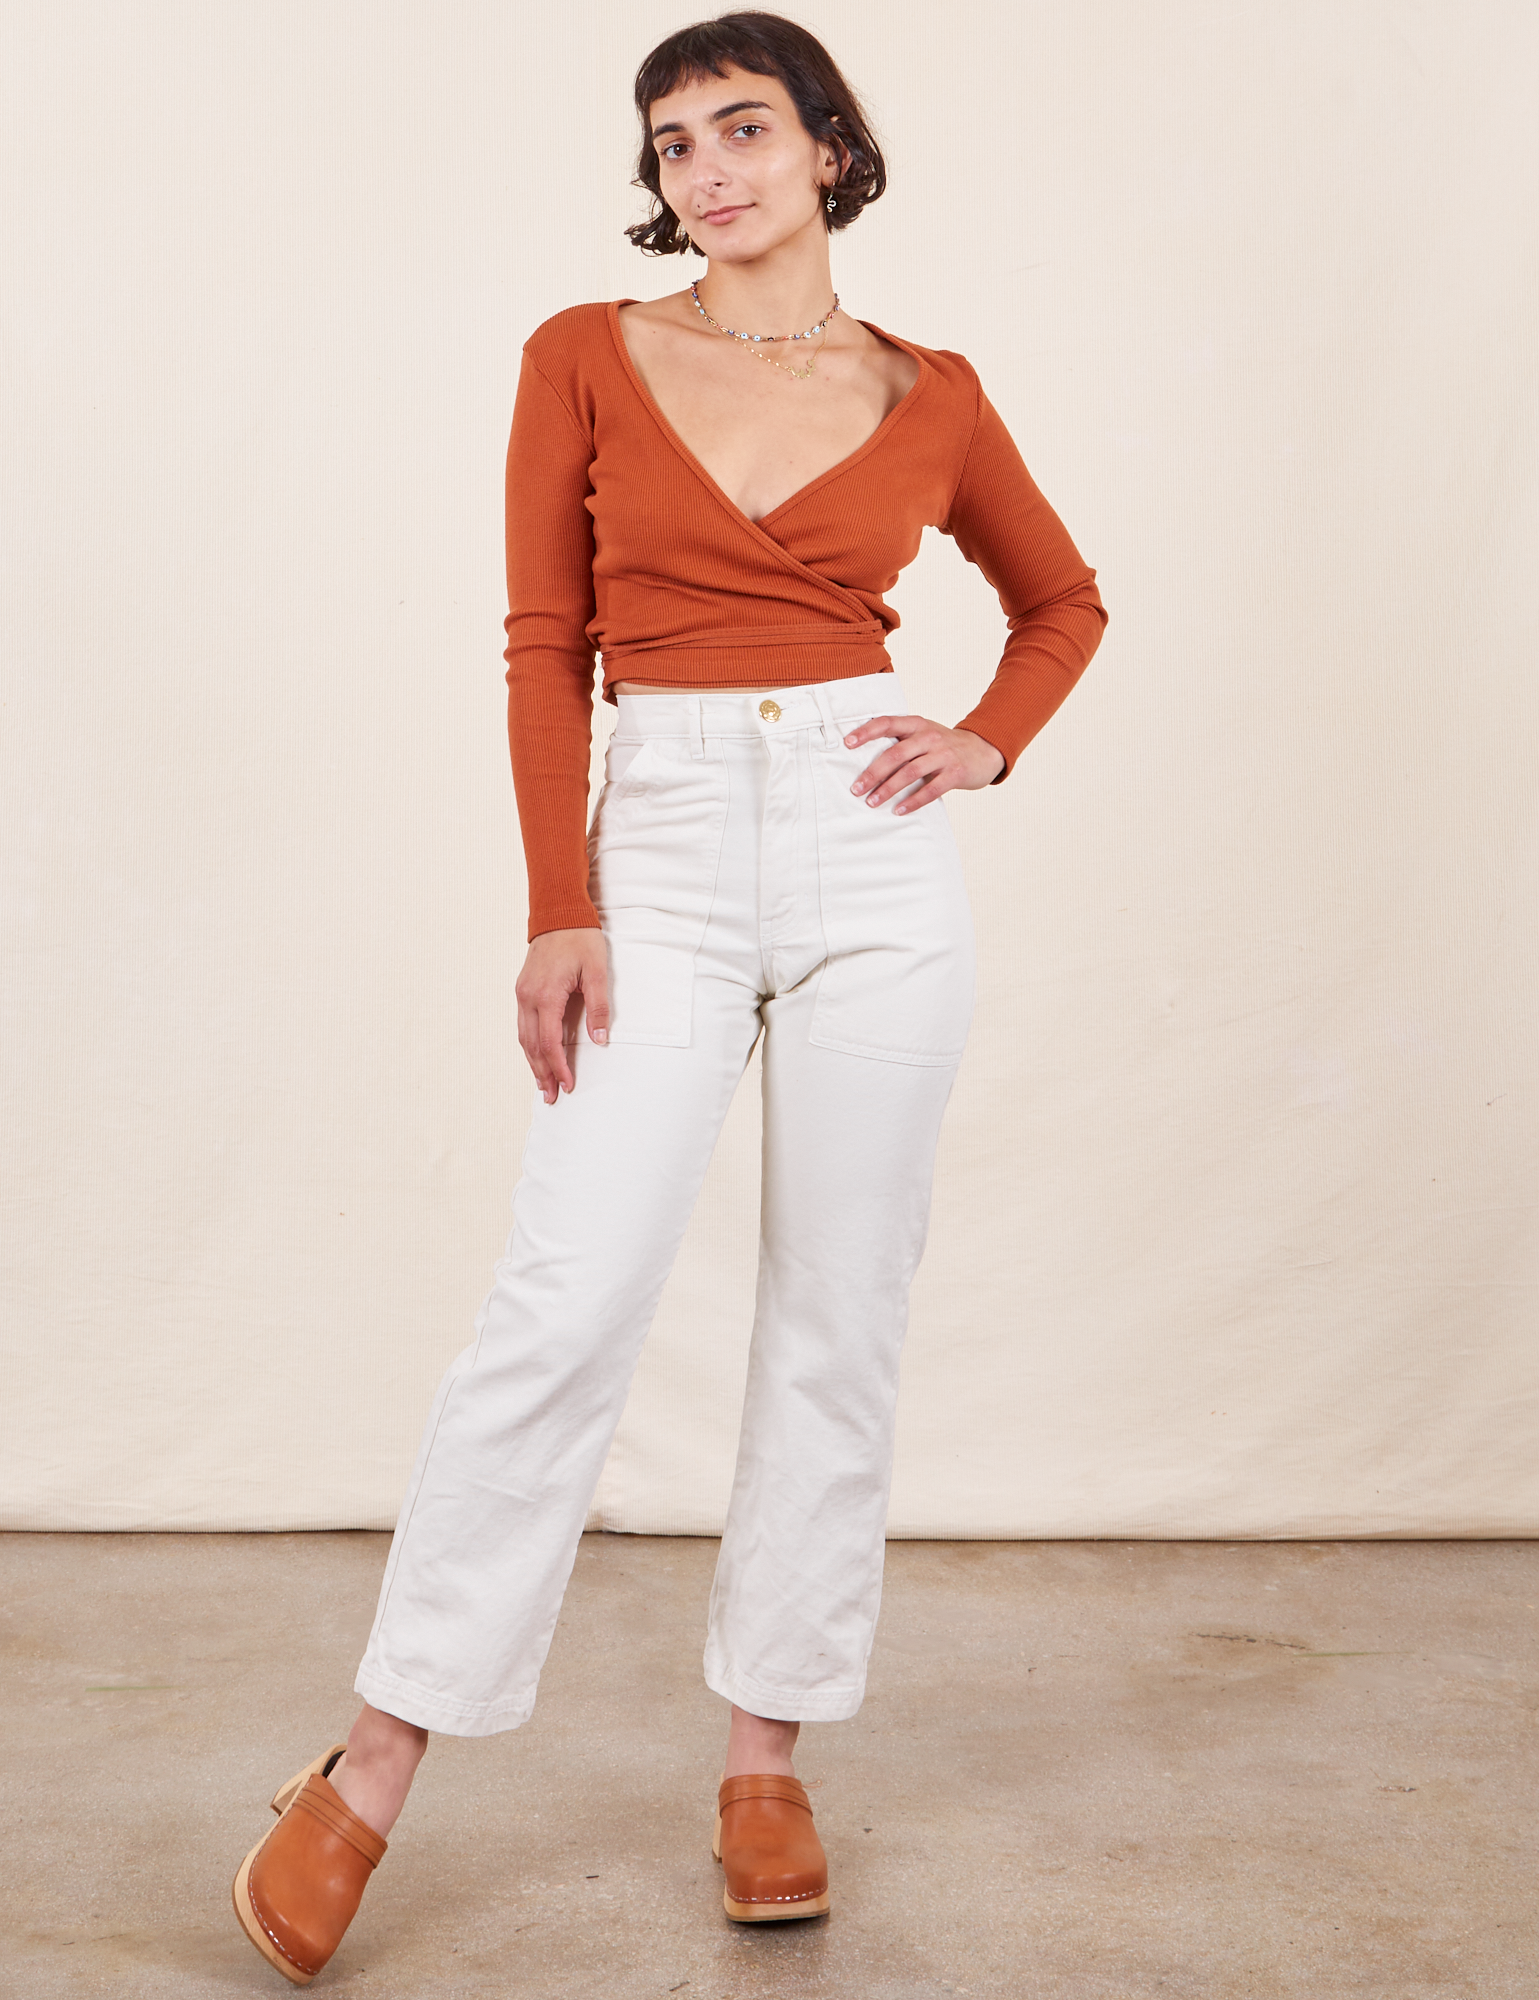 Soraya is 5&#39;2&quot; and wearing Petite XXS Work Pants in Vintage Off-White paired with burnt terracotta Wrap Top